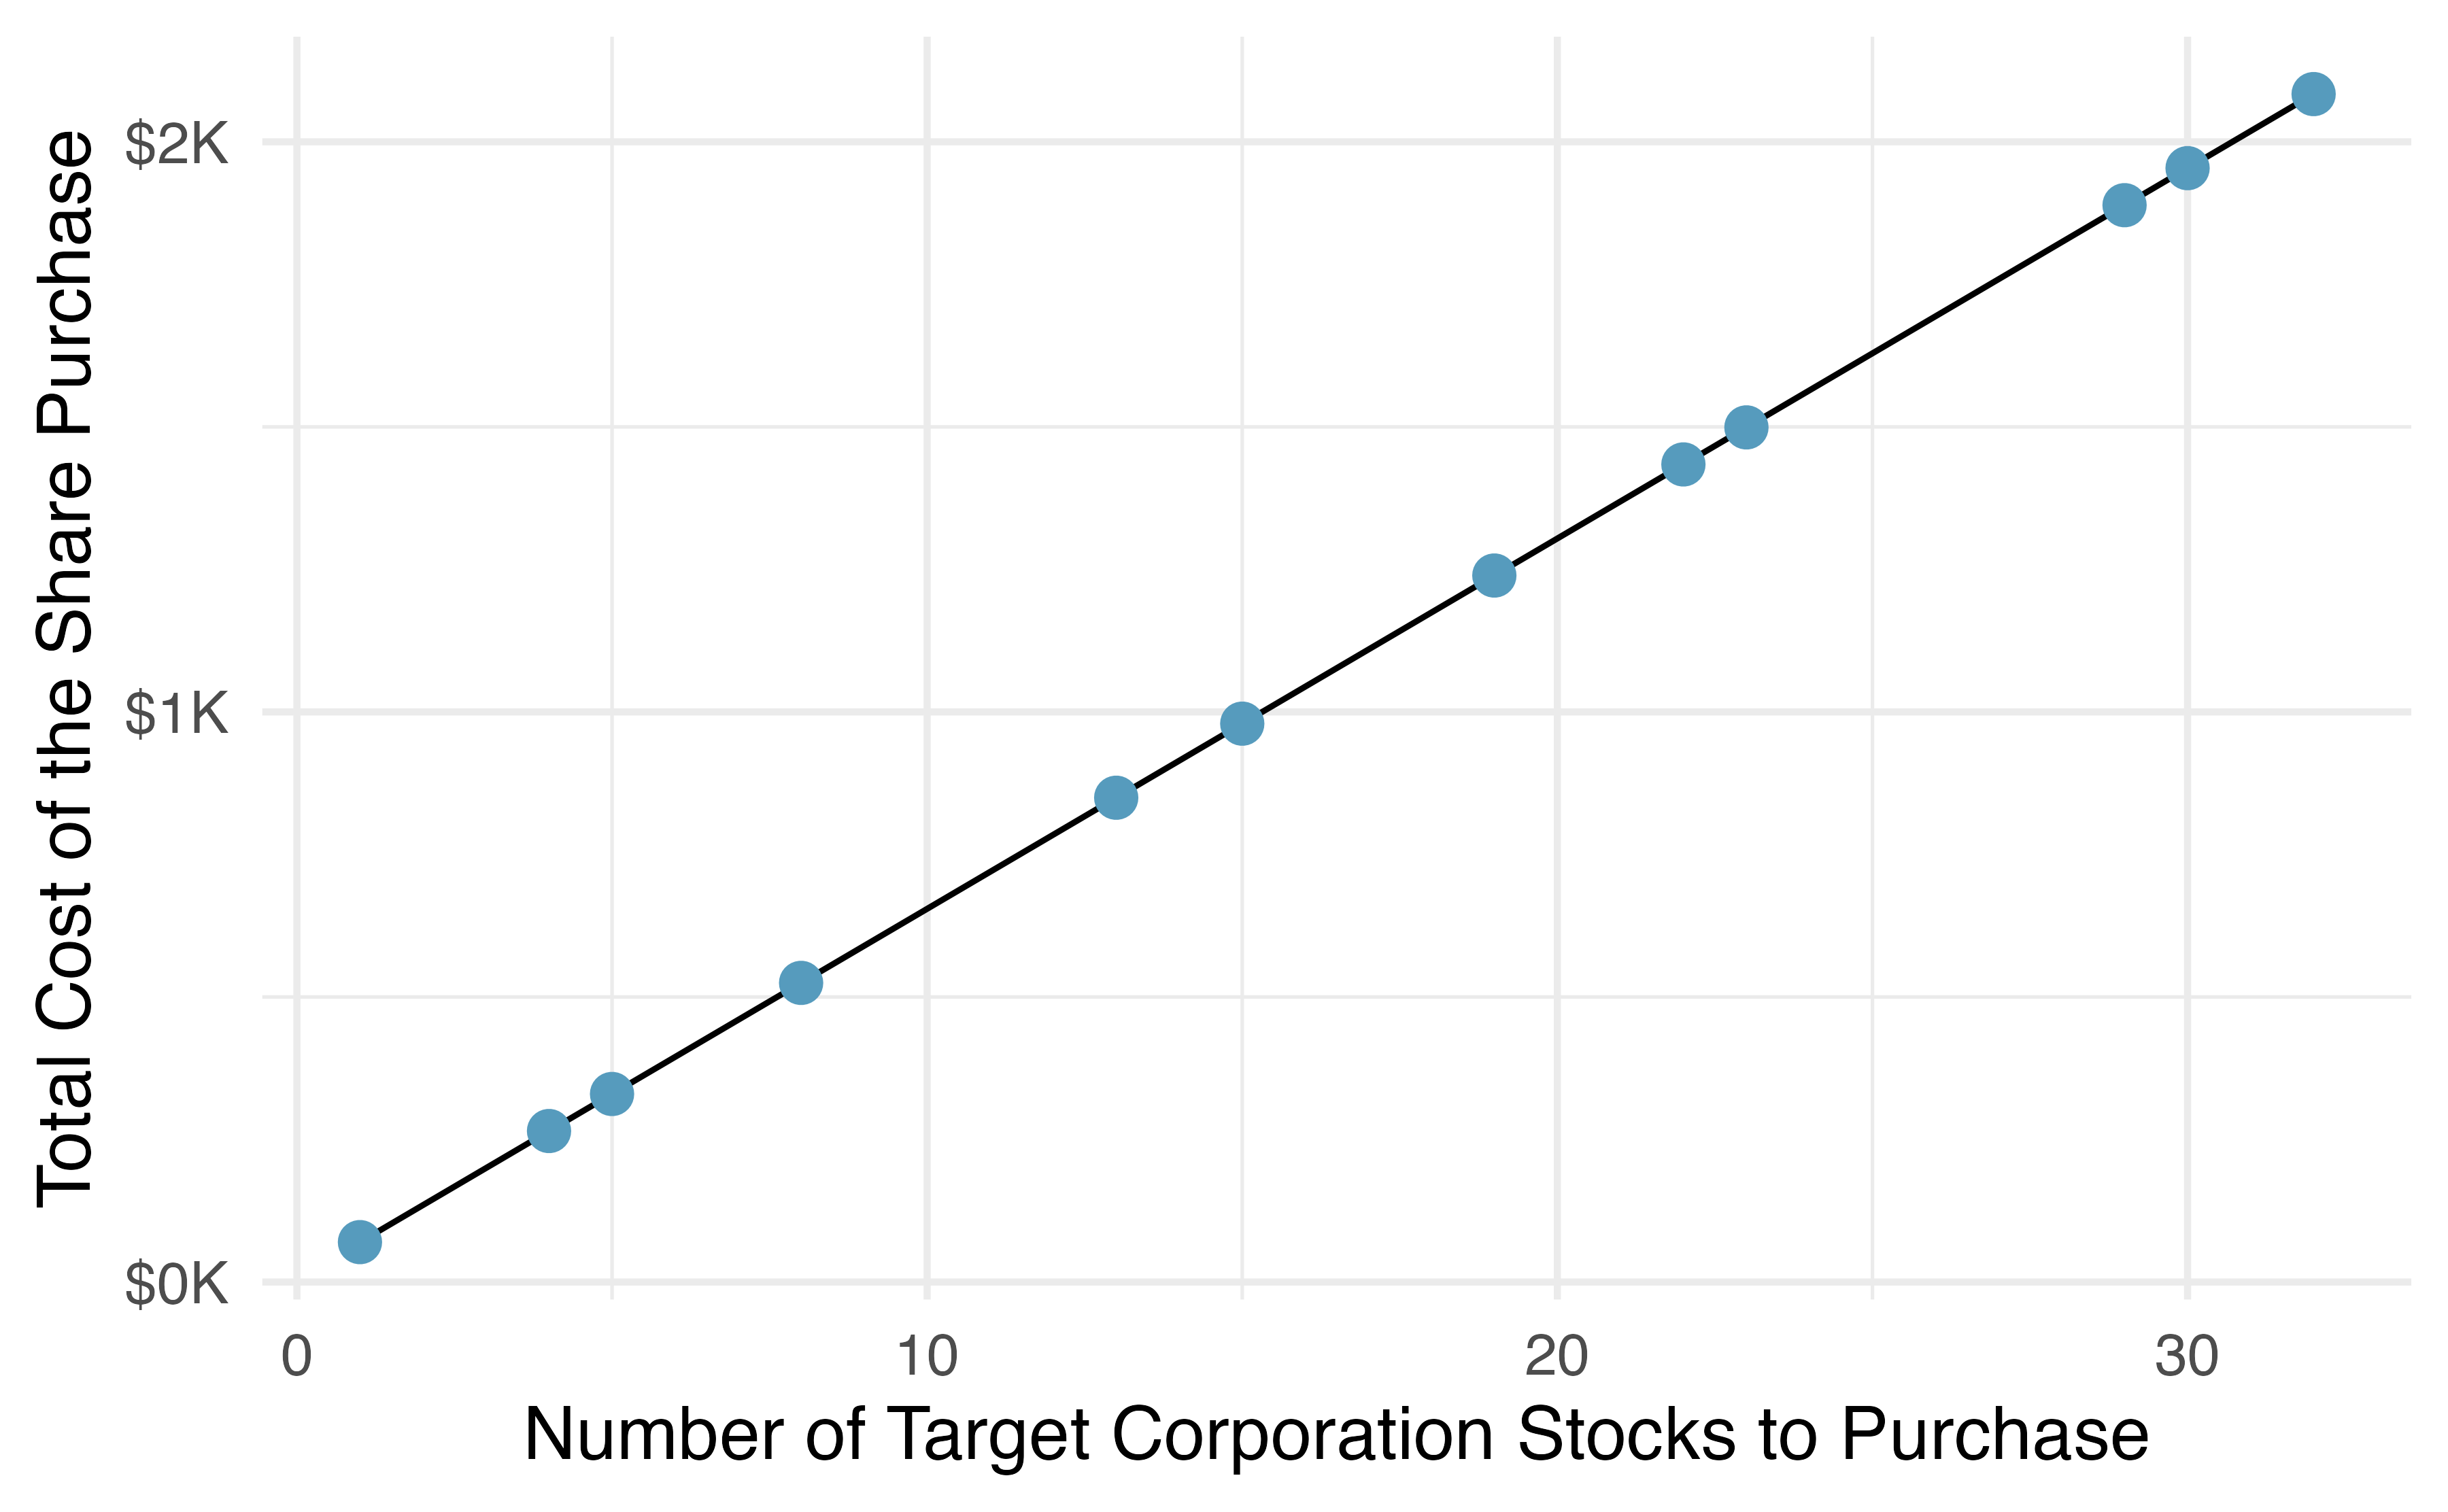 Requests from twelve separate buyers were simultaneously placed with a trading company to purchase Target Corporation stock (ticker `TGT`, December 28th, 2018), and the total cost of the shares were reported. Because the cost is computed using a linear formula, the linear fit is perfect.